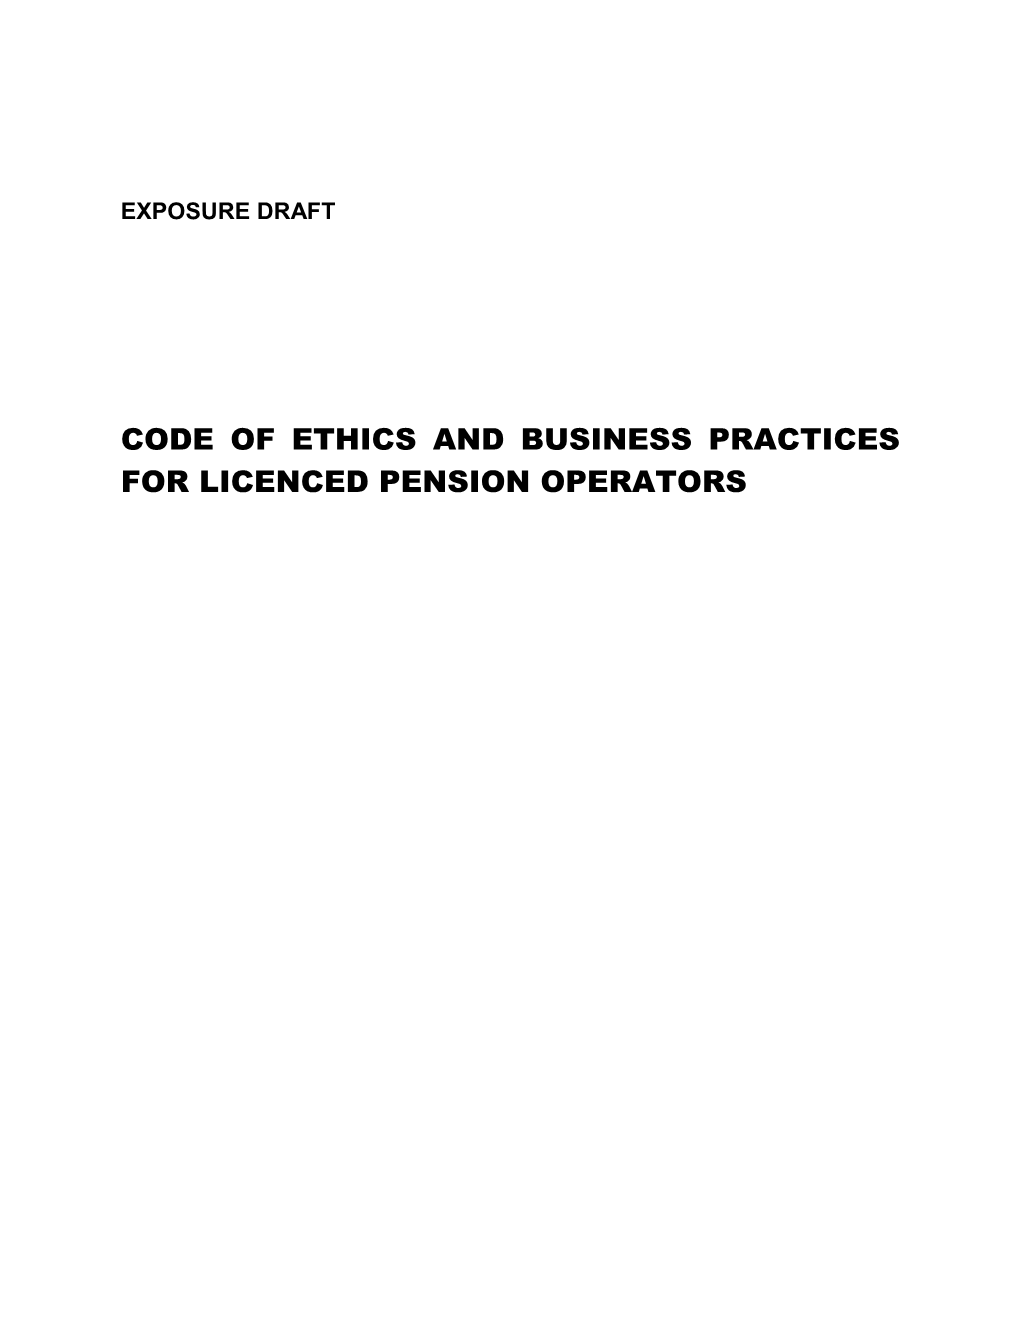 Code of Ethics and Business Practices for Licenced Pension Operators